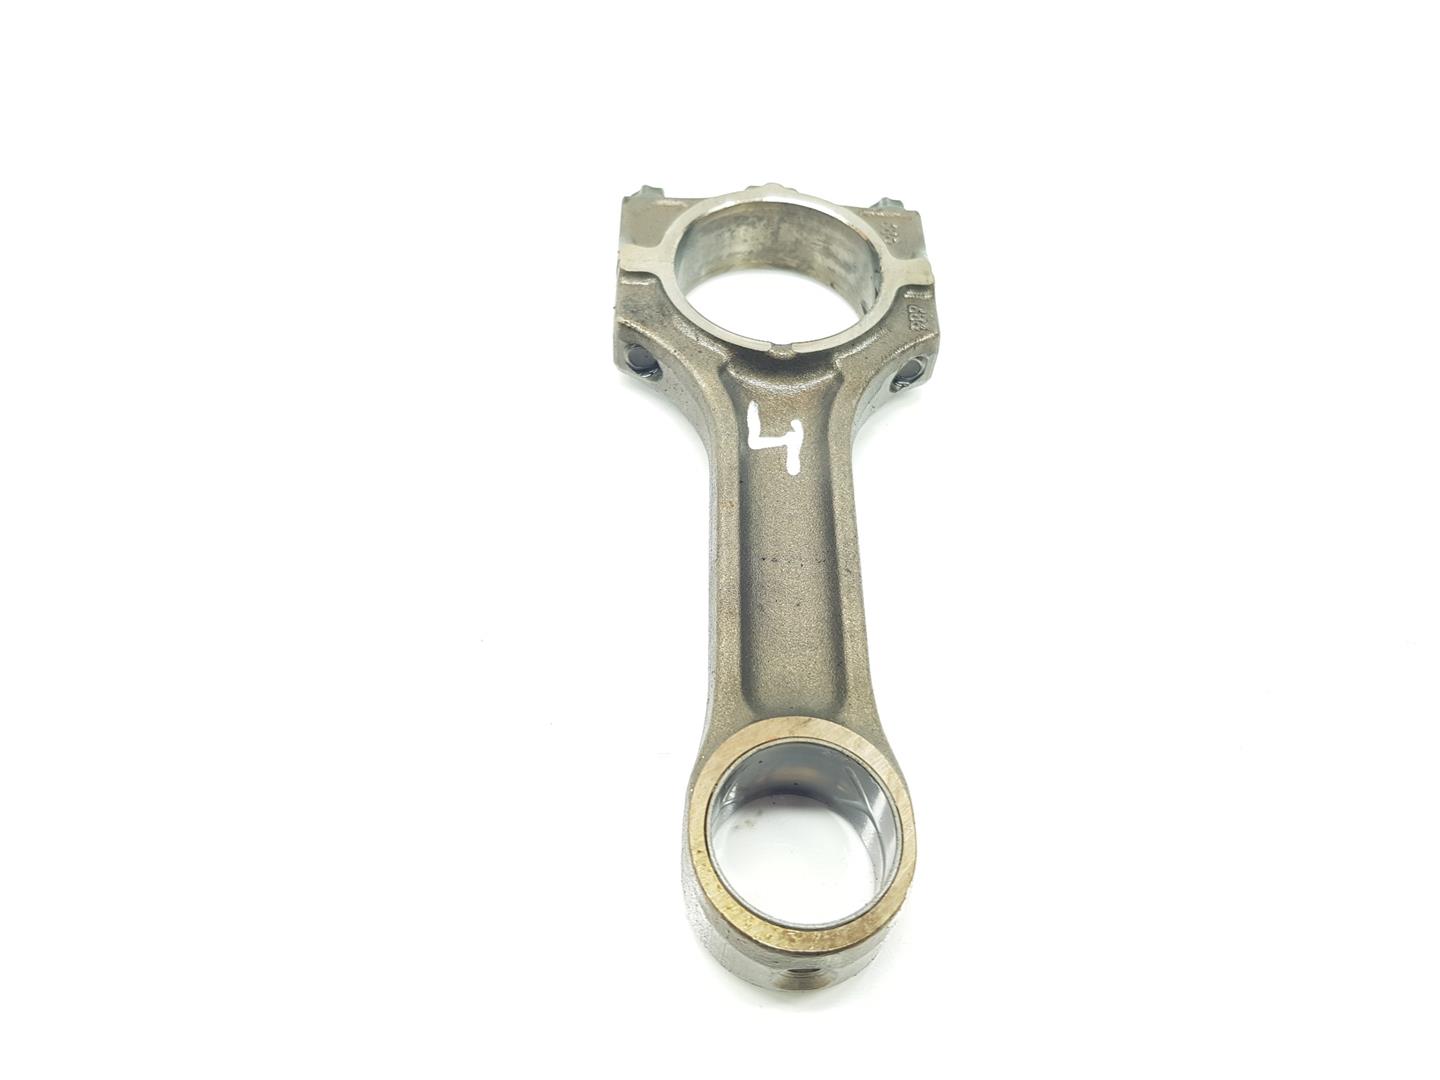 BMW 3 Series E46 (1997-2006) Connecting Rod 11242247518, 2247518, 1111AA 24175394